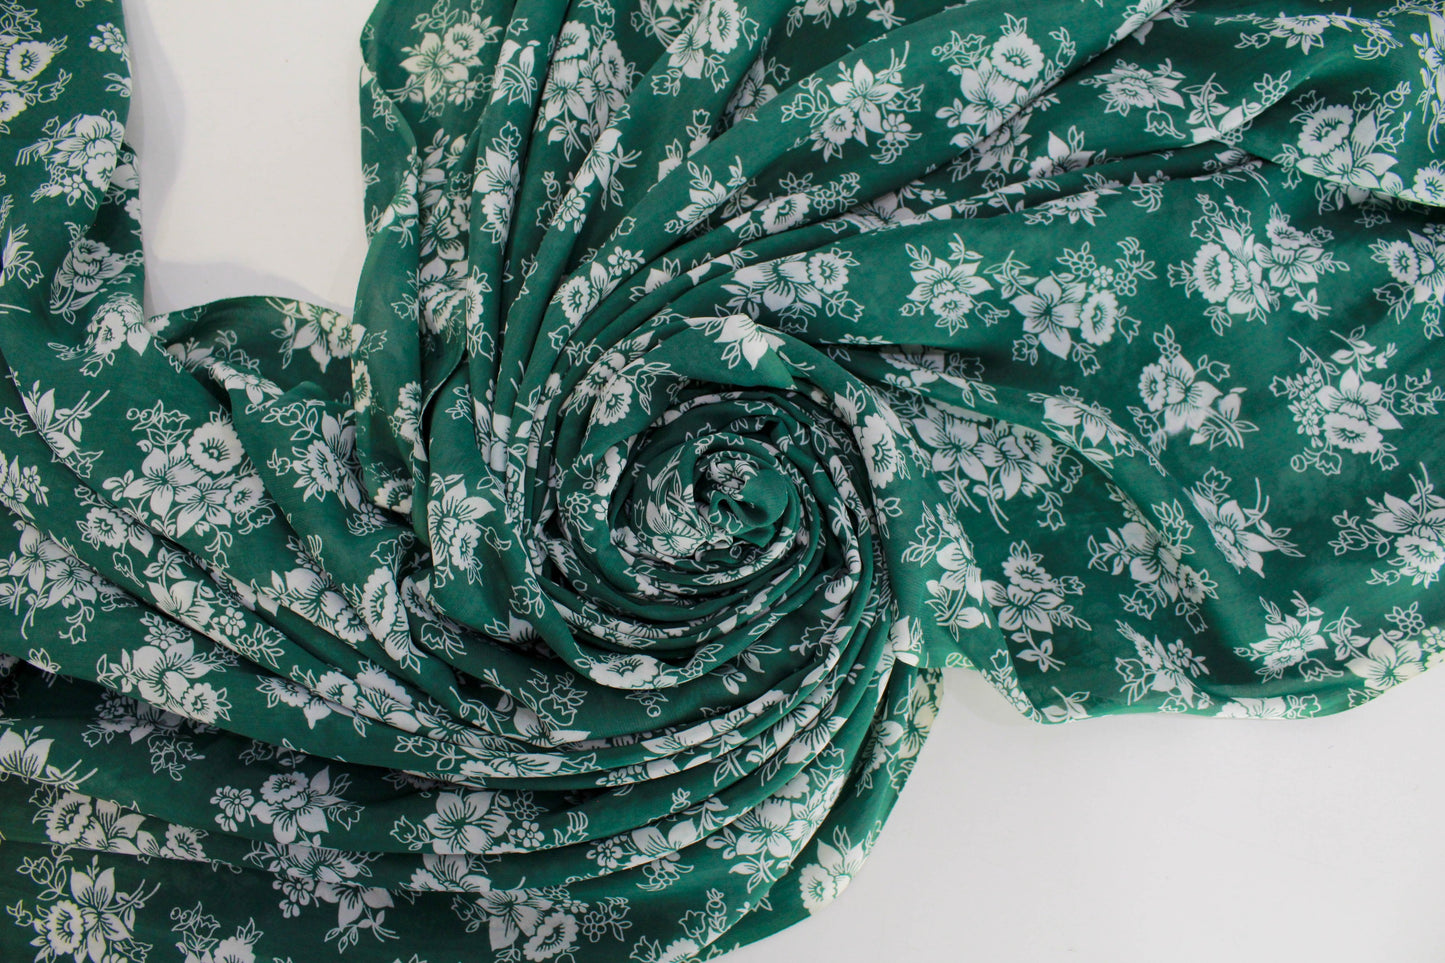 1940s green floral print nylon sewing fabric 6.5 yards vintage sewing